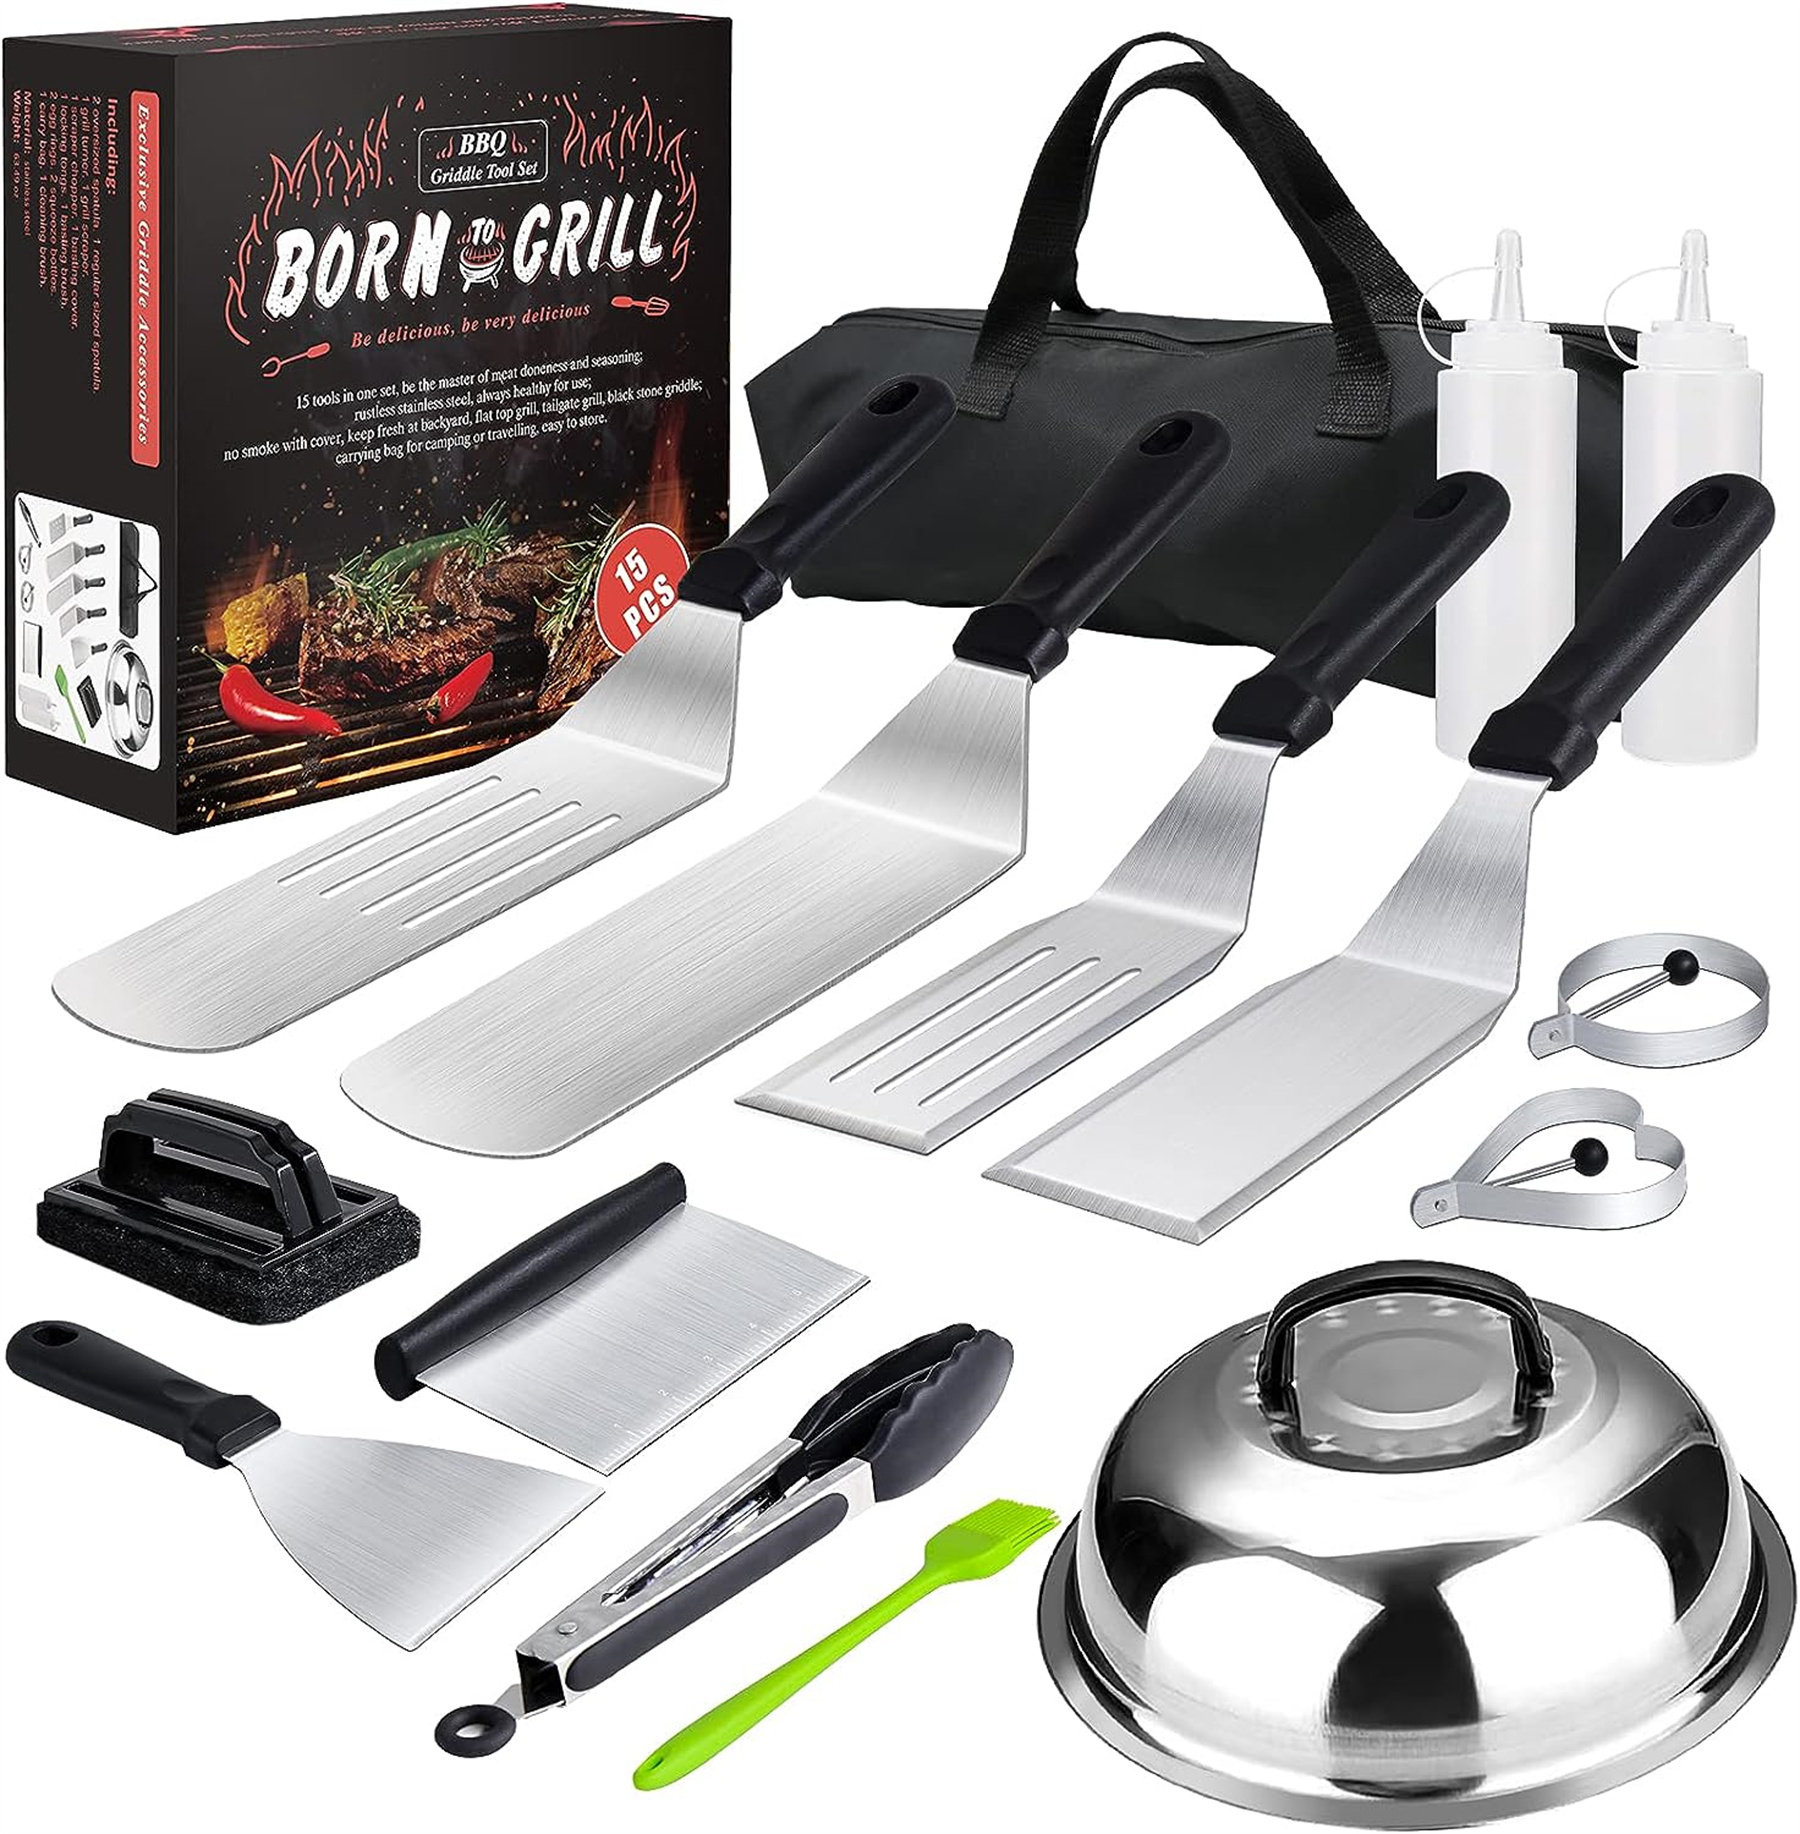 Tools & Equipment for Smoking & Grilling Meat